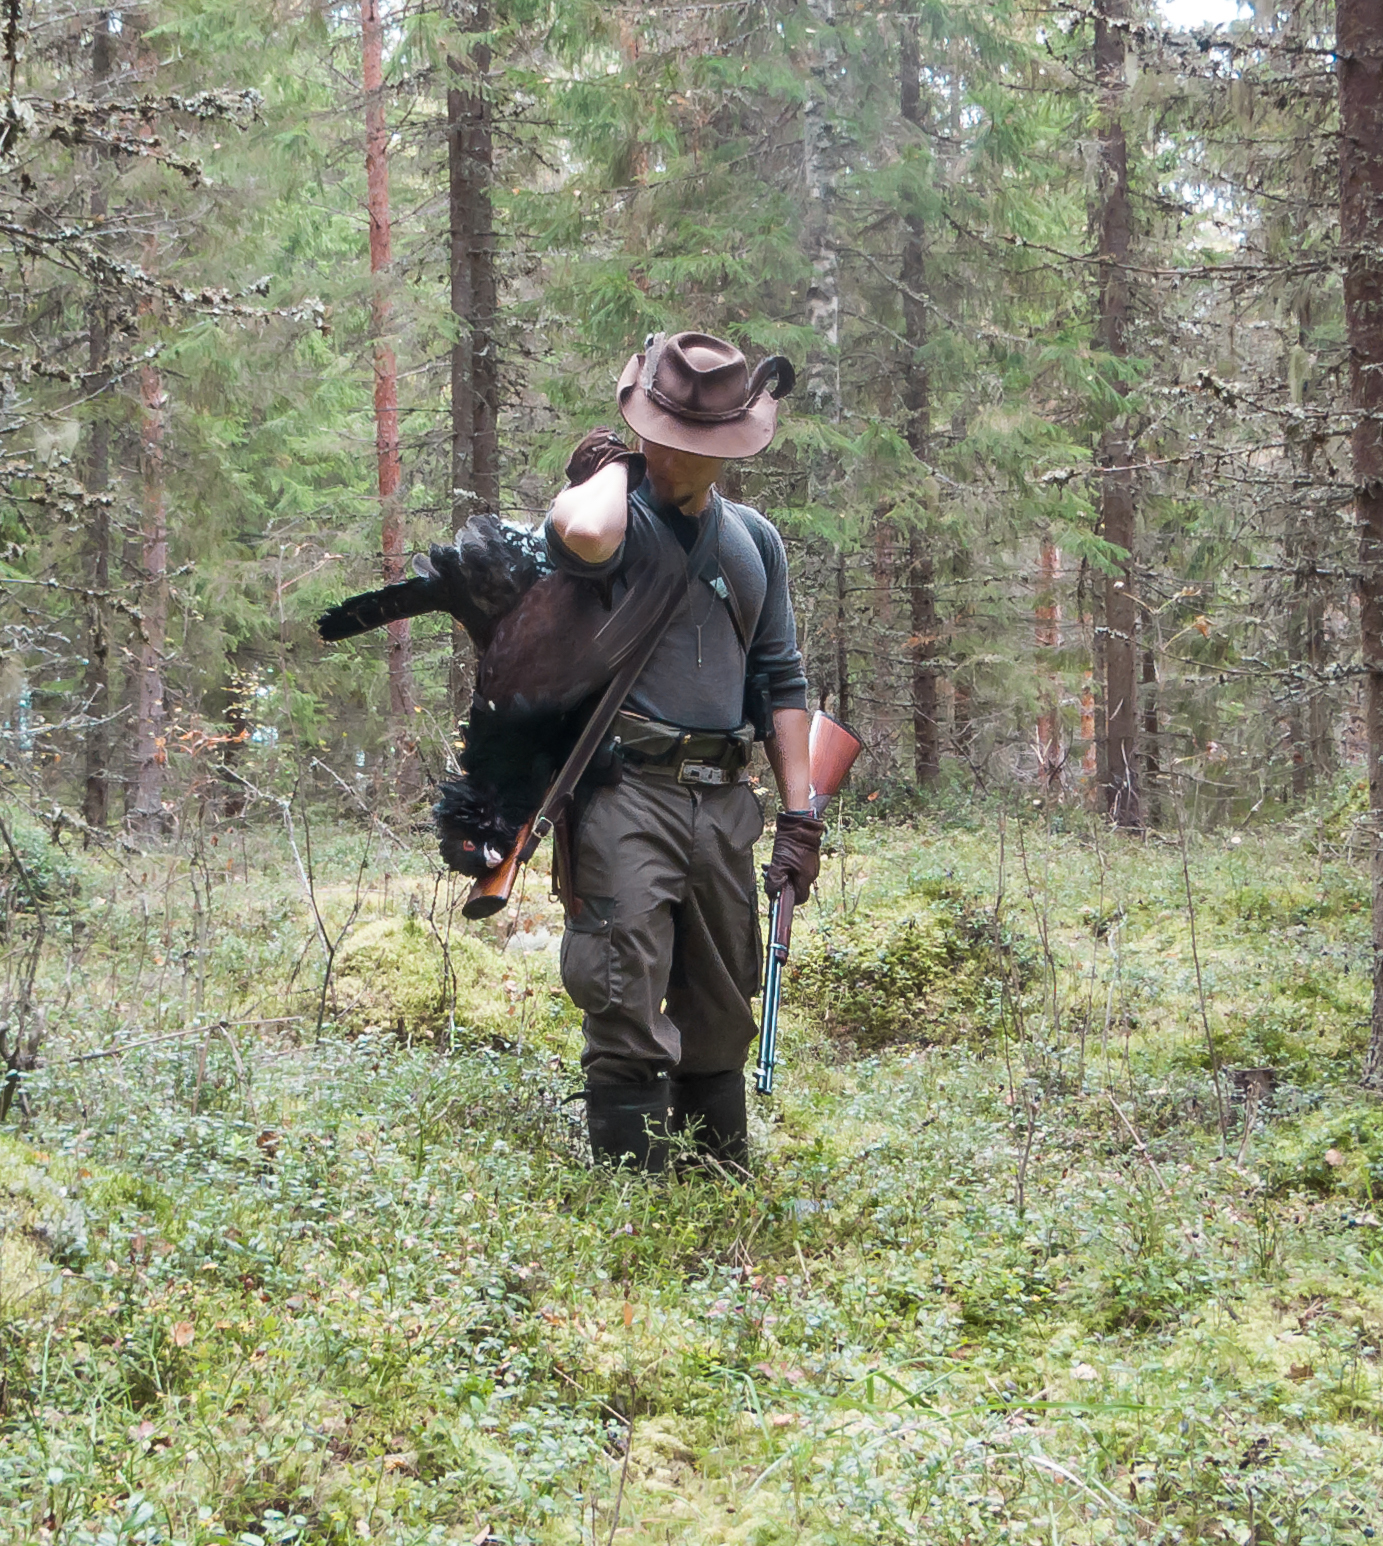 Me posing with my capercaillie catch. Metsosaalis.